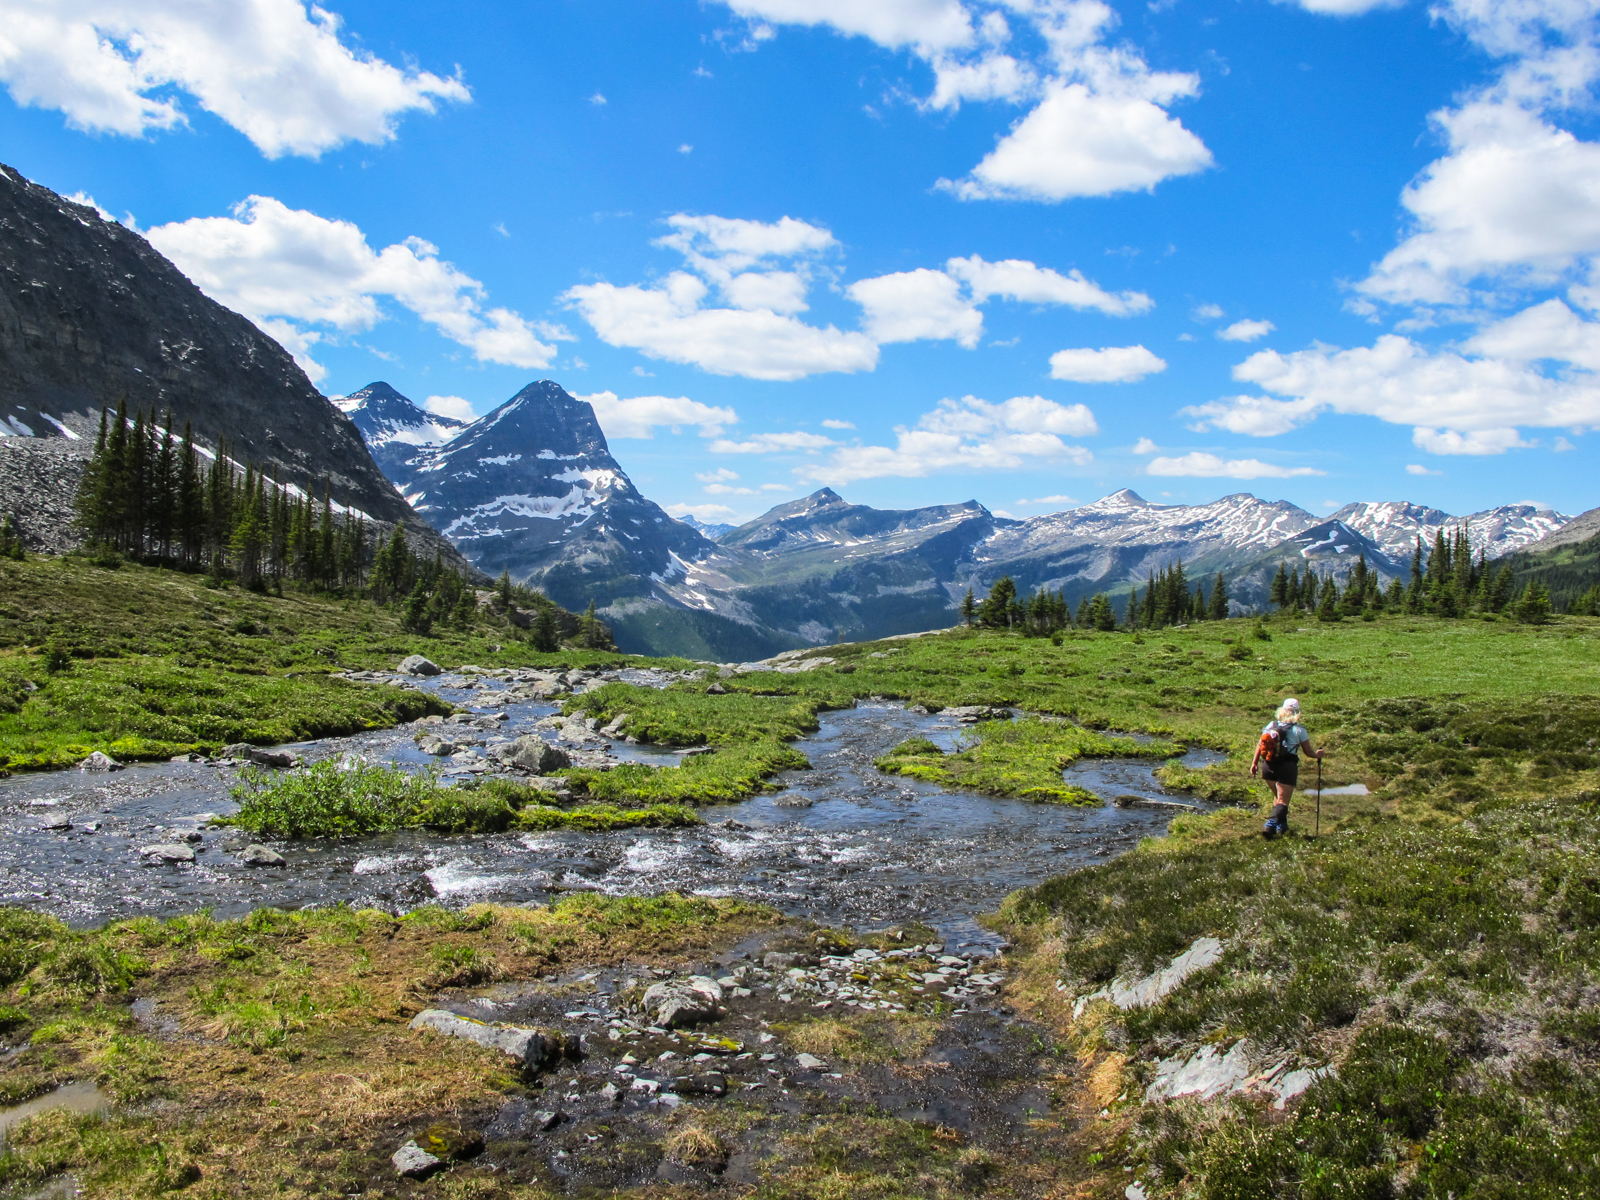 Lone hiker in a grassy meadow with a stream in the mountains